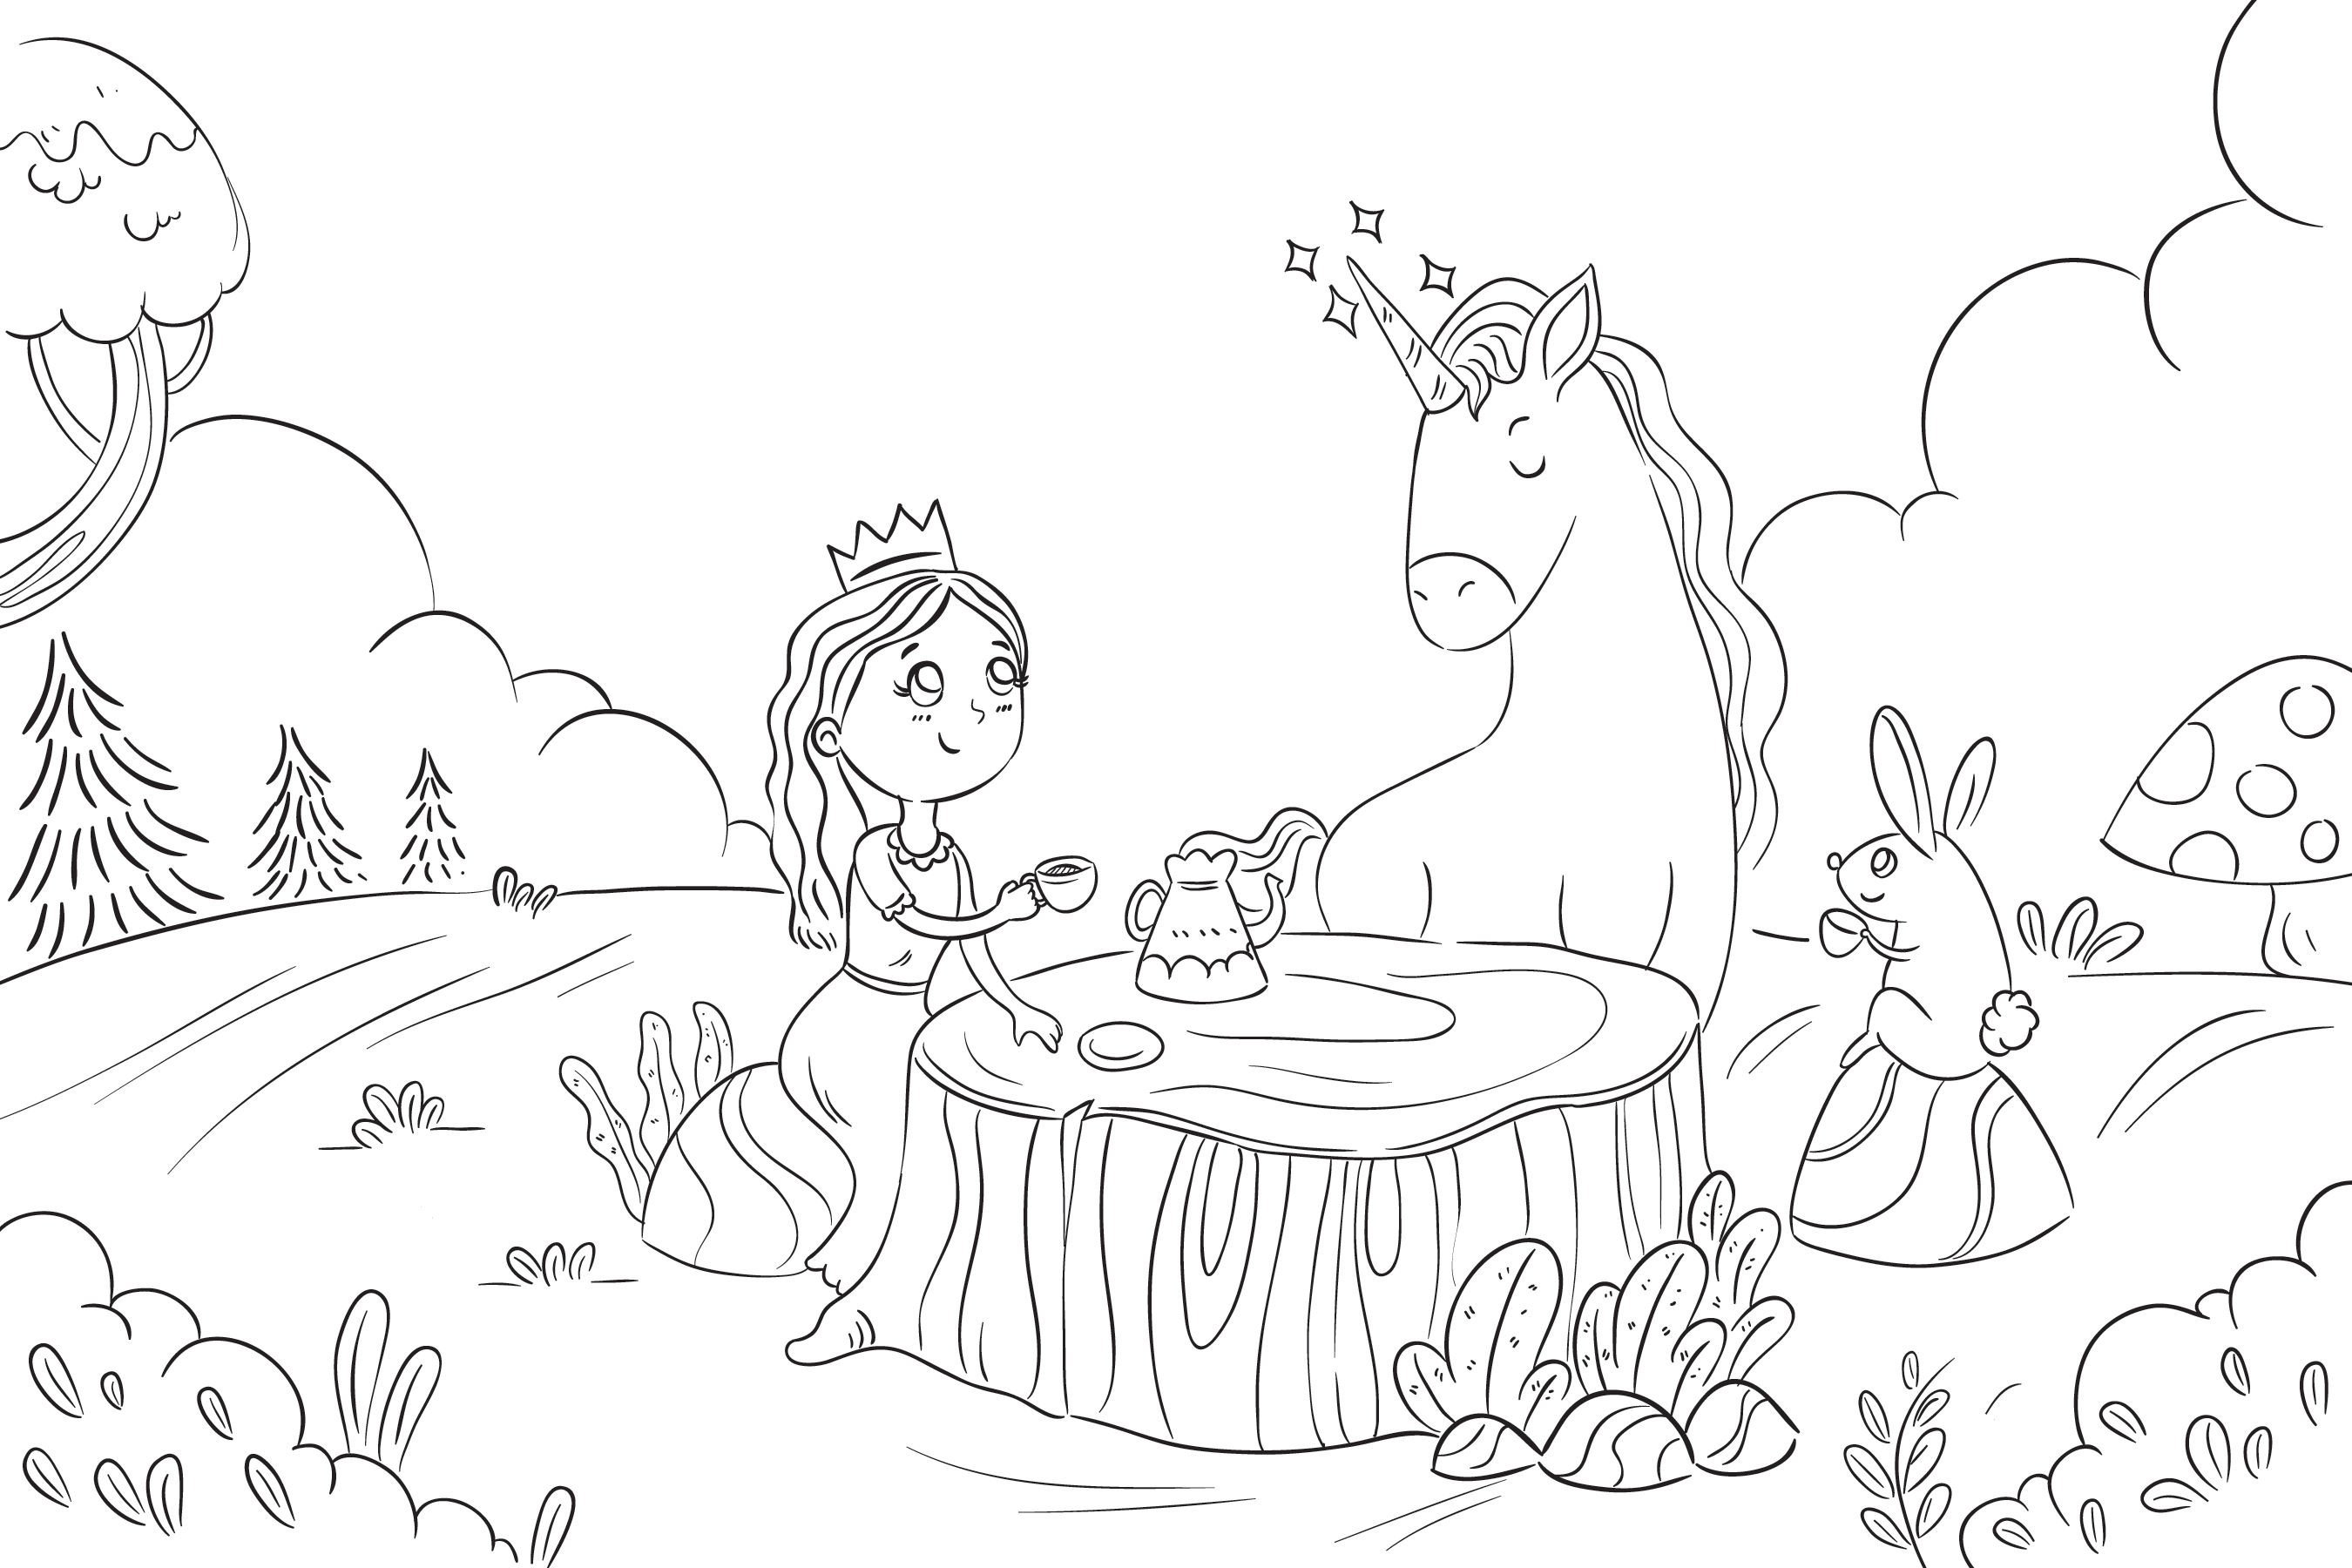 Create coloring pages illustration by Windasimetri   Fiverr